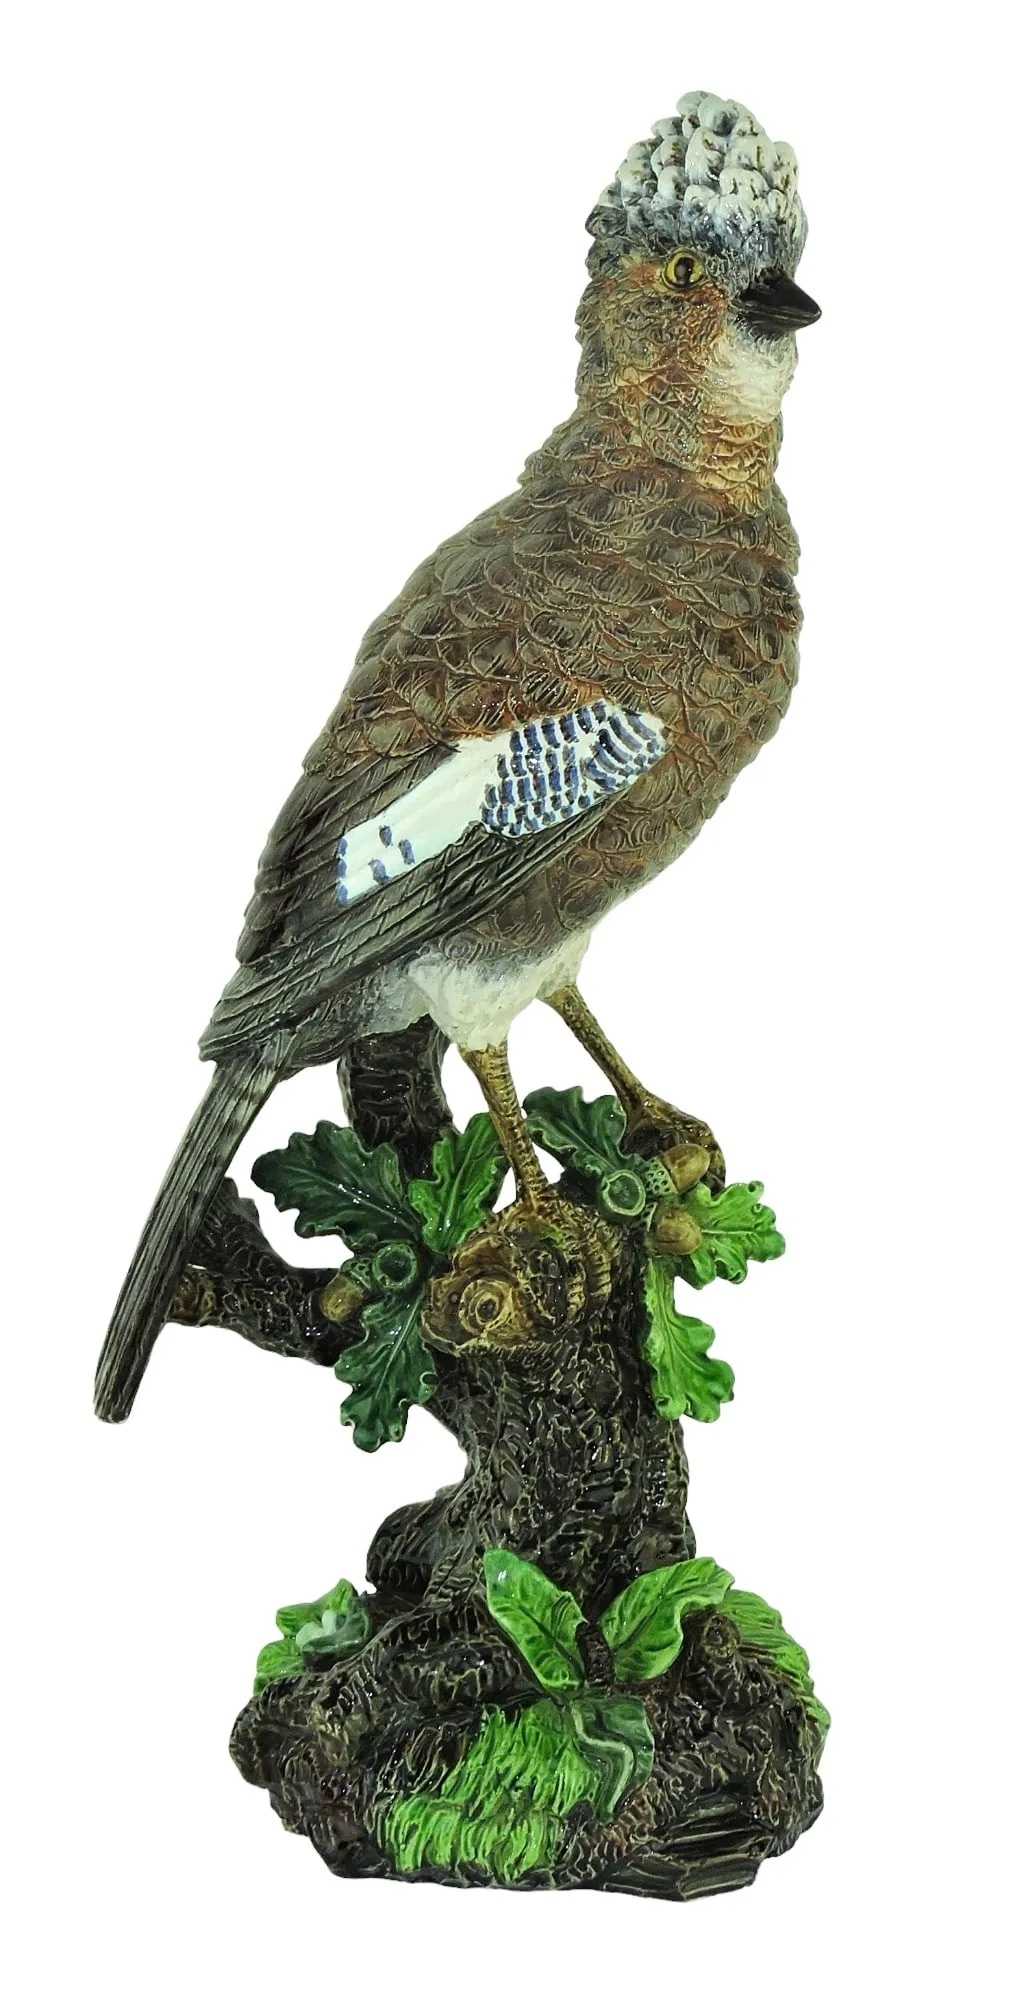 Hugo Lonitz Majolica Model of a Jay Bird, which sold for $7,000 ($8,680 with buyer’s premium) at Strawser.